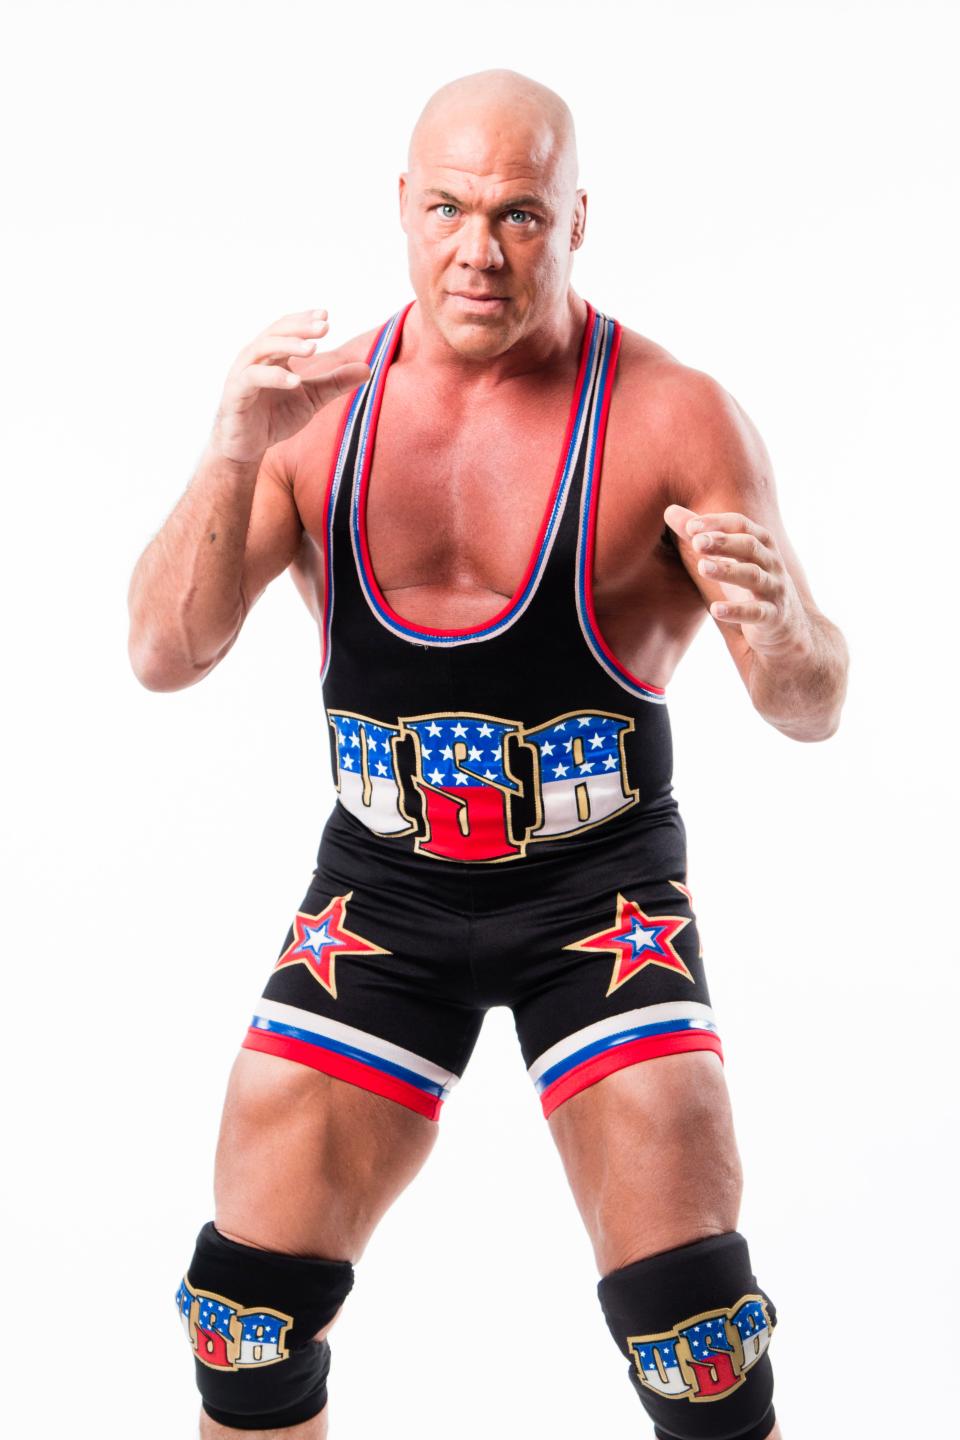 Olympic gold medalist and World Wrestling Entertainment Hall of Fame member Kurt Angle will appear at Northeast Wrestling's Six Flags Slam Fest at Six Flags Great Adventure in Jackson on Sunday, Aug. 15.